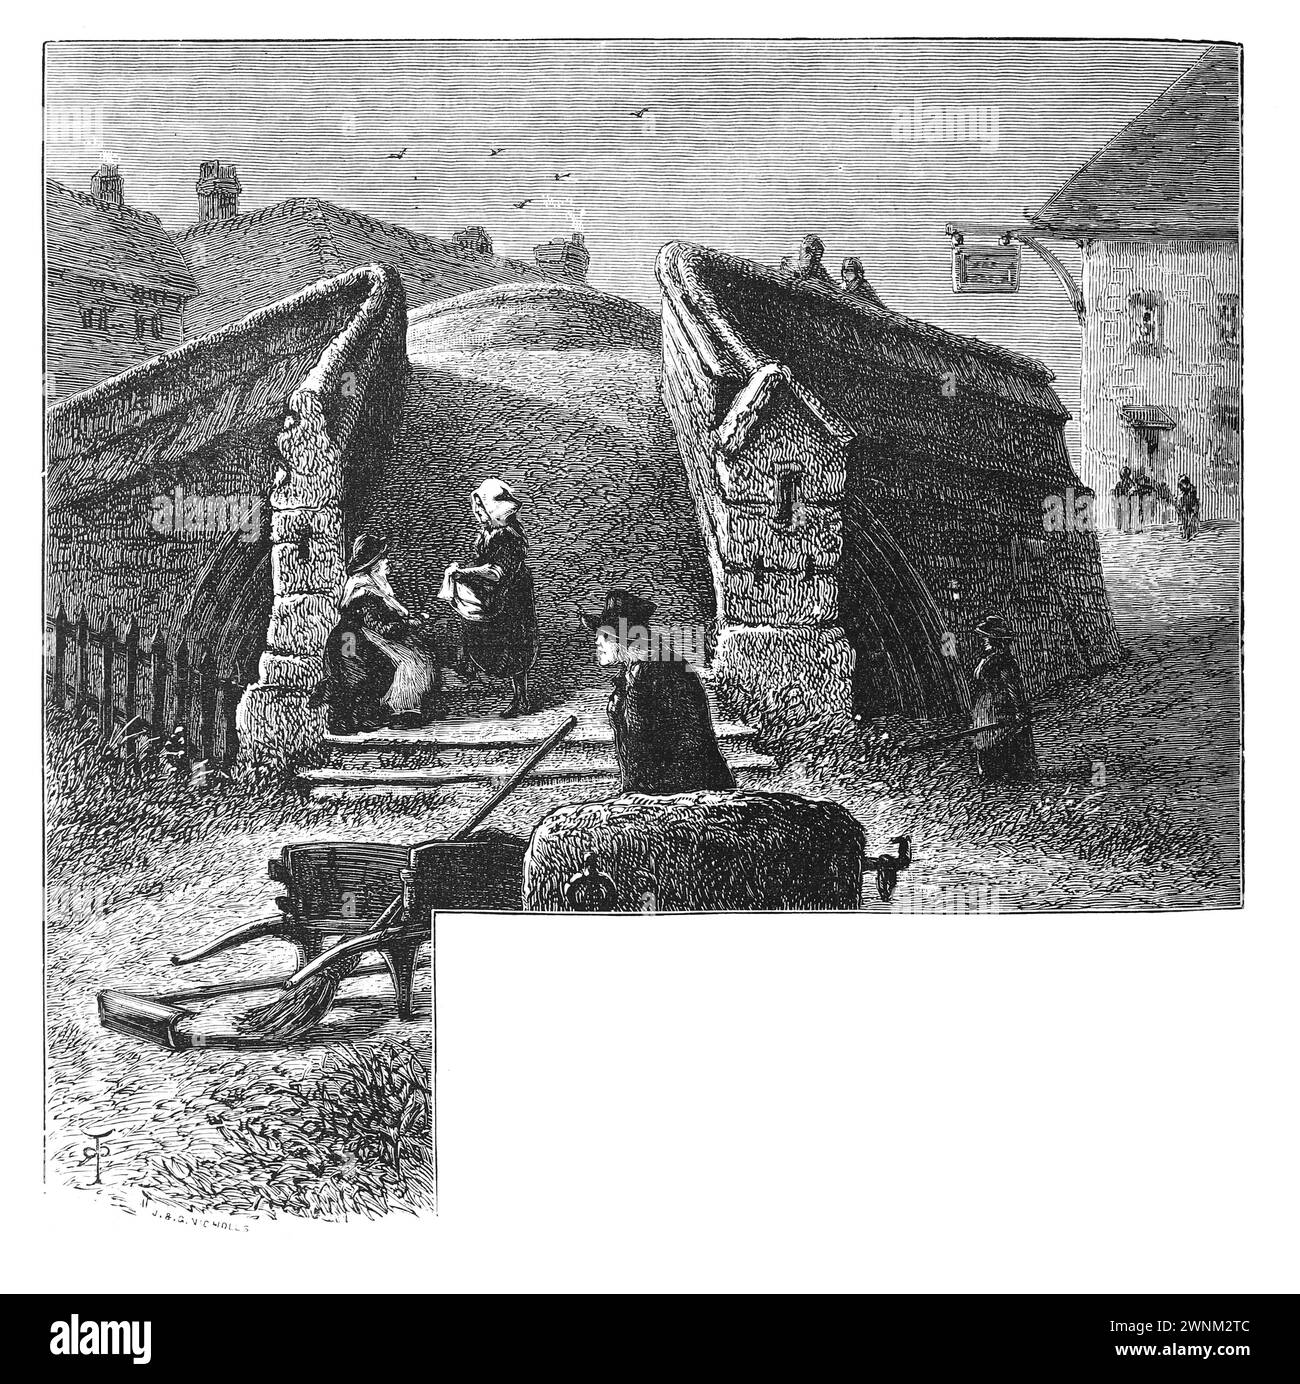 Crowland Bridge, Cambridgeshire; 19th century; Black and white illustration from 'Our Own Country' a Descriptive, Historical and Pictorial guide to the UK published in late 1880s by Cassell, Petter, Galpin & Co. Historic pictures of Briatin. Stock Photo